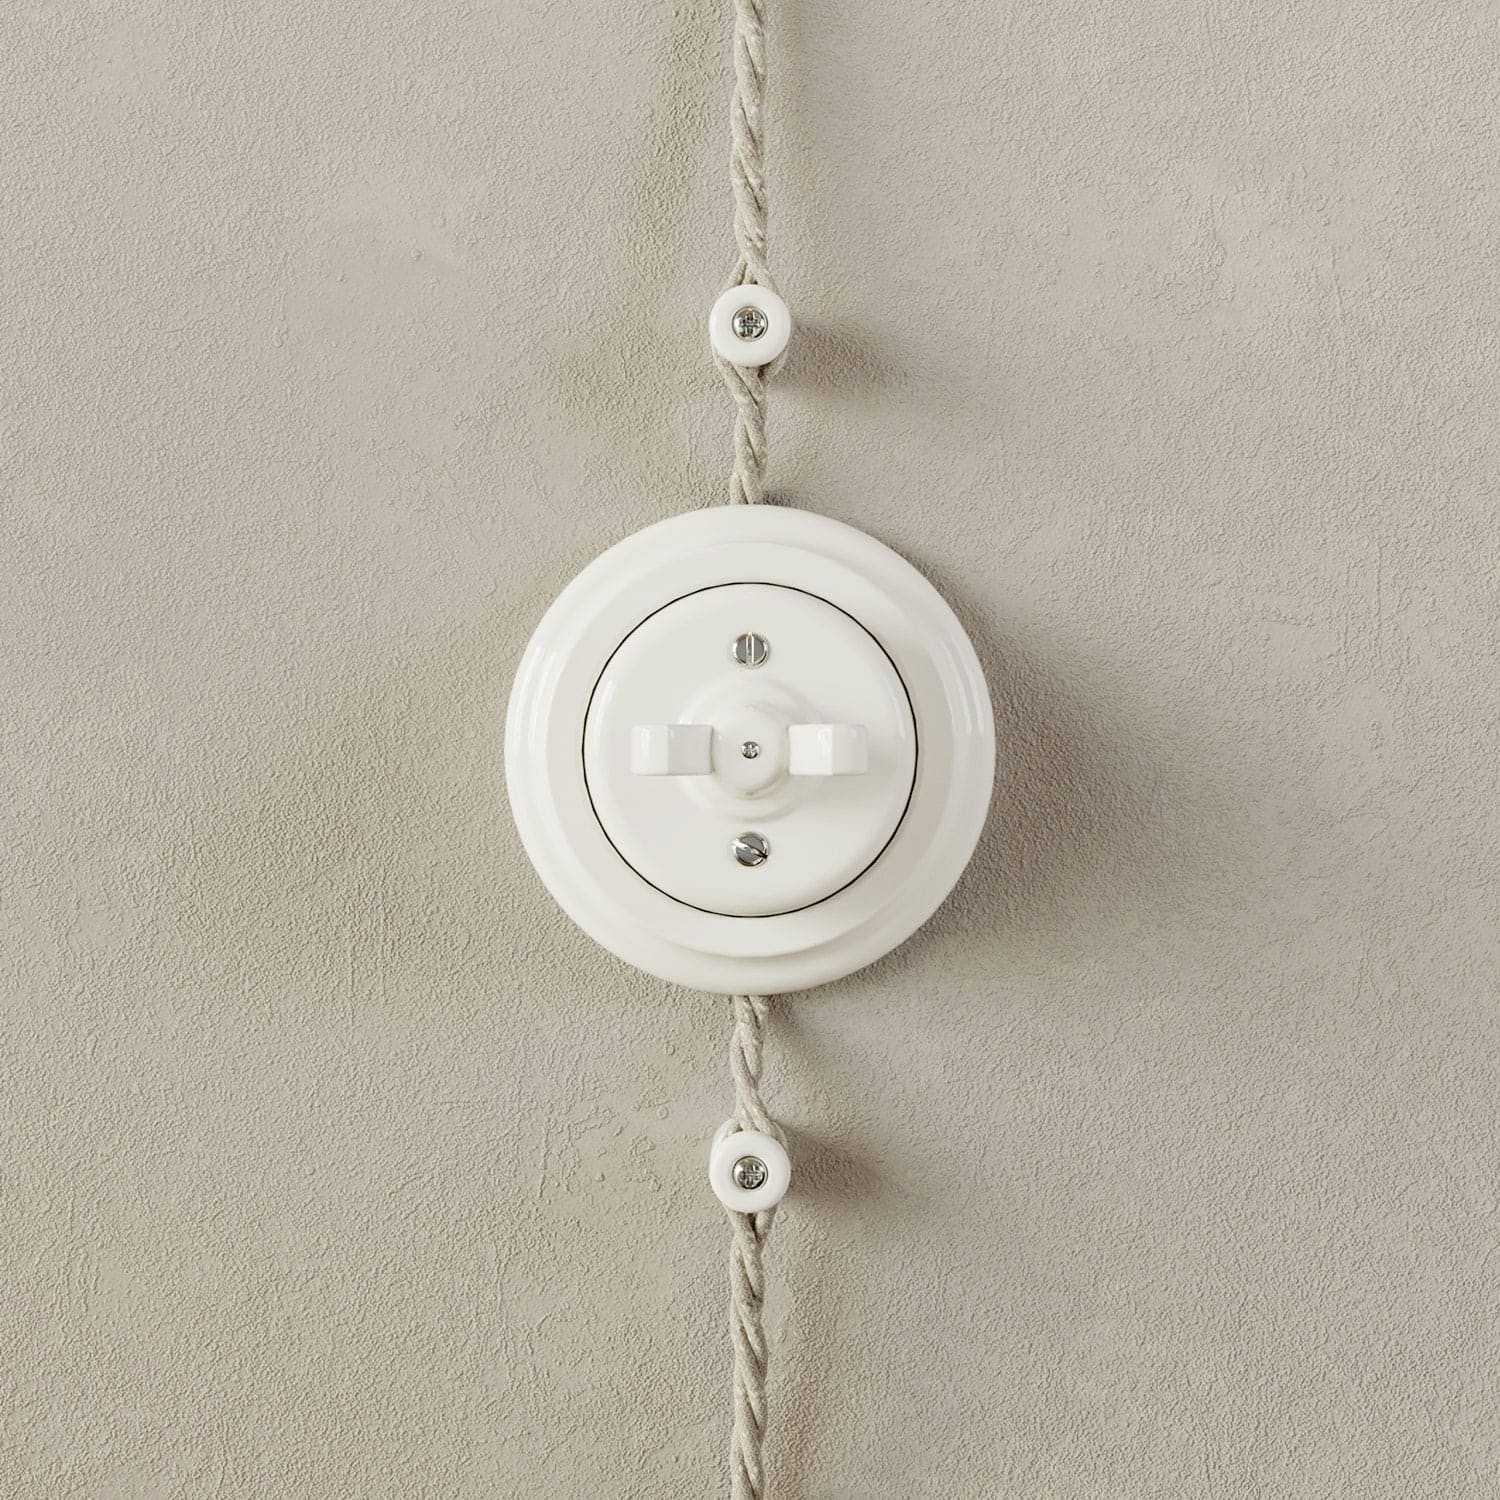 Porcelain base for electrical socket and switch/dimmer